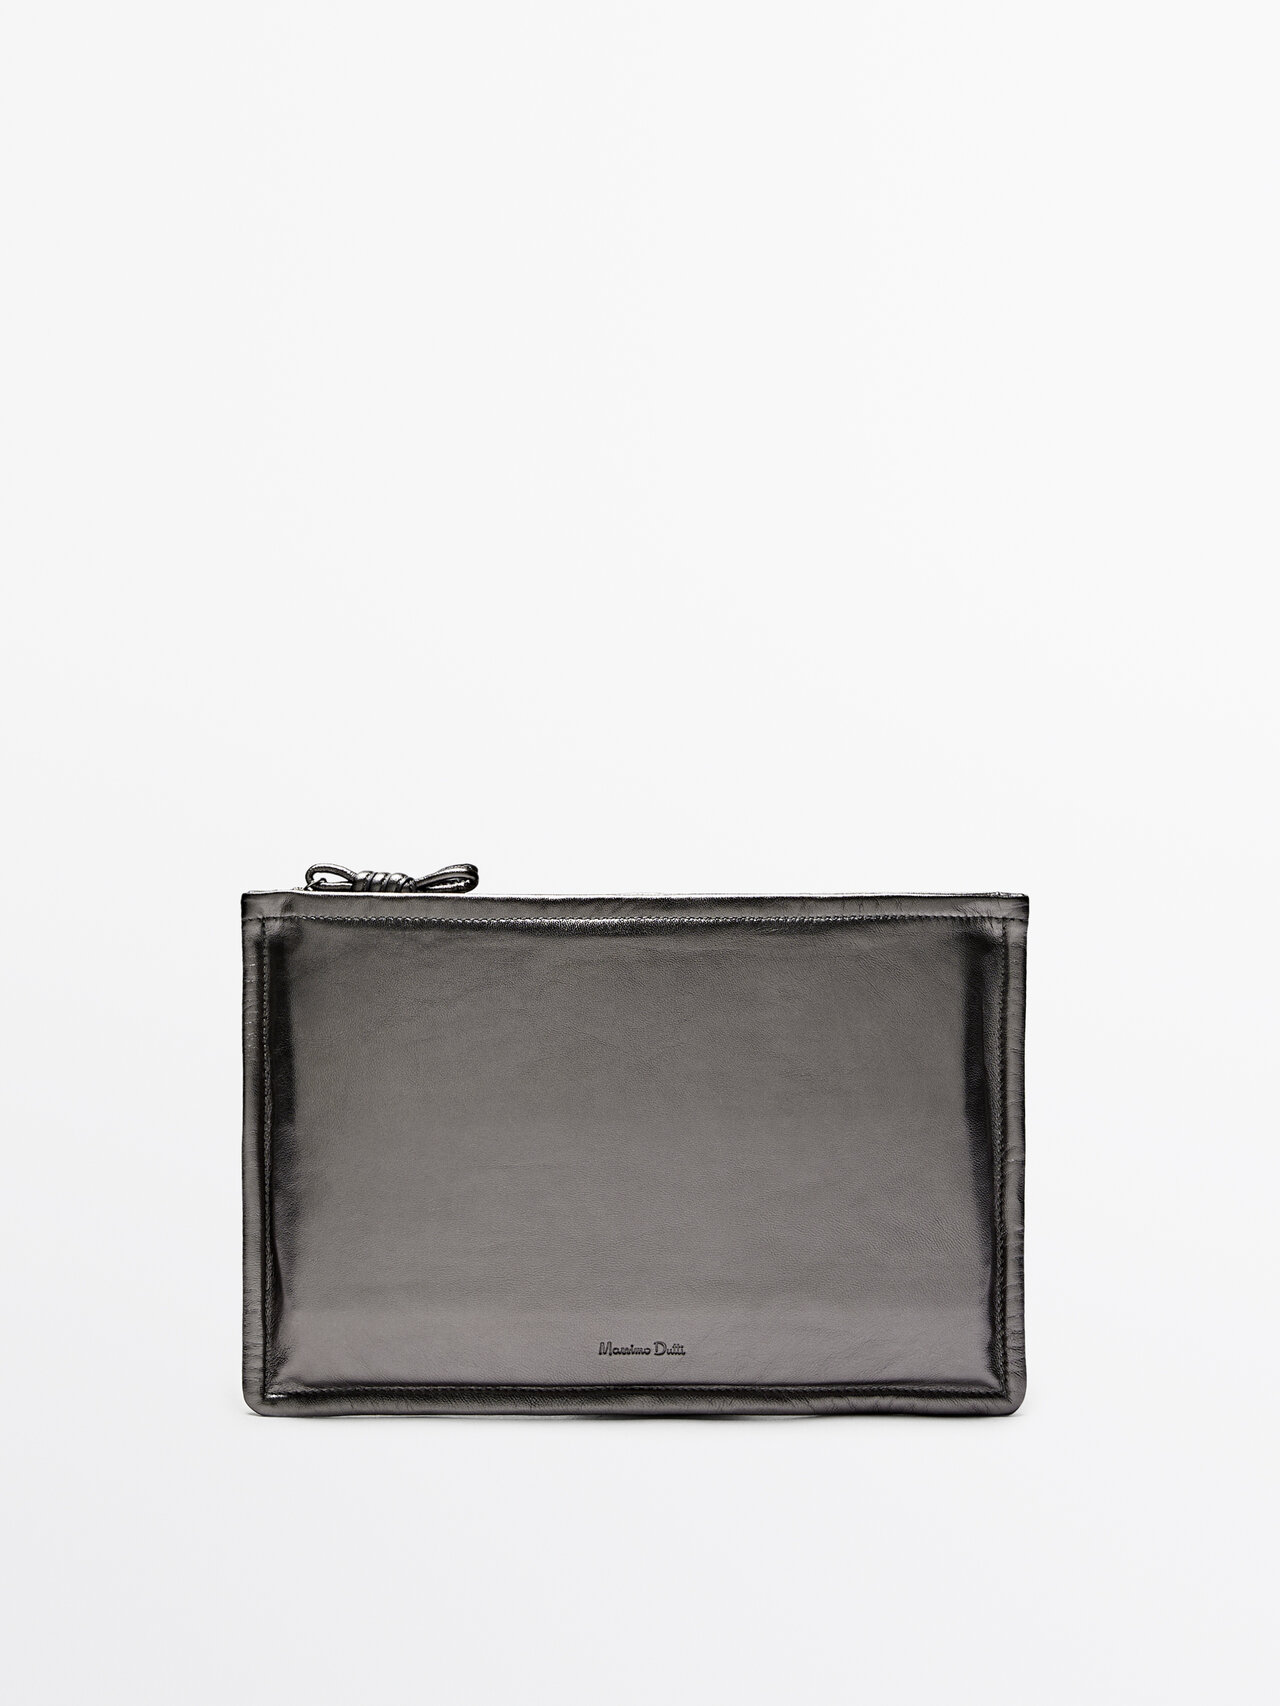 Massimo Dutti Nappa Leather Clutch With Knot Detail In Black